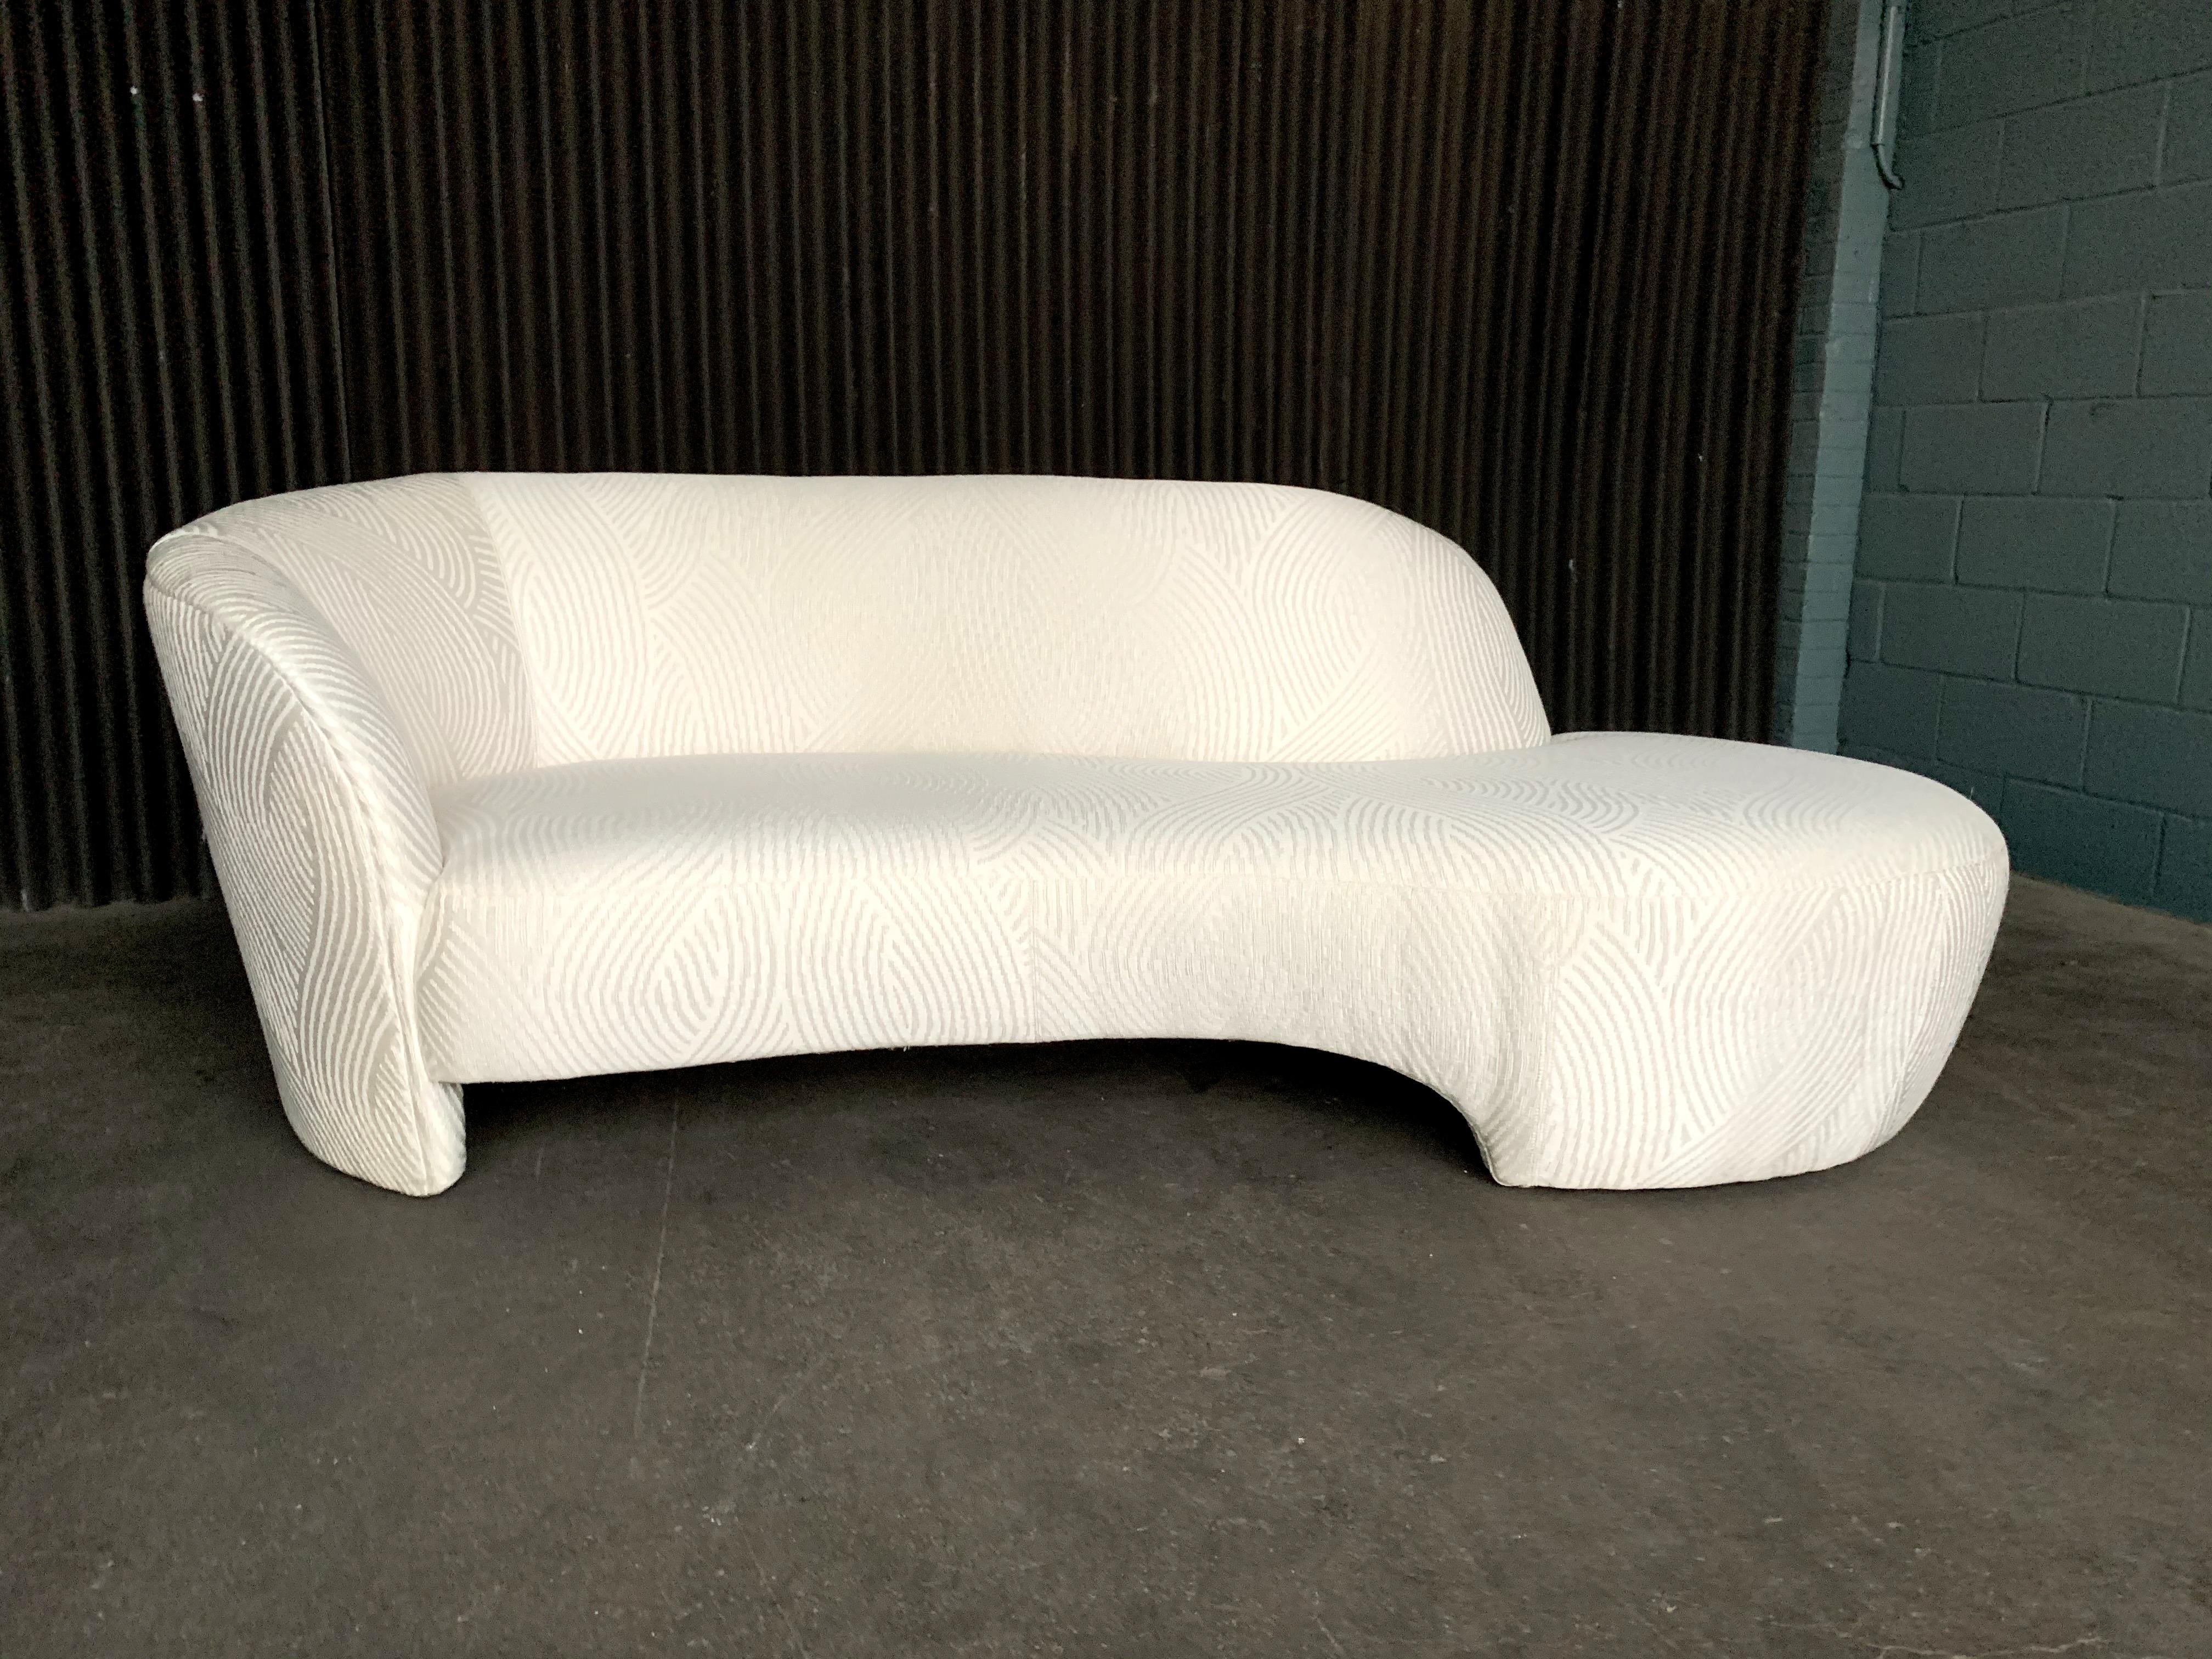 Absolutely flawless white chaise lounge from designer, Vladimir Kagan for Weiman.
I currently have two of these and am posting them separately.
Gorgeous and came from a stunning home.
Fabric is pure white with no issues at all. Poly-cotton blend.